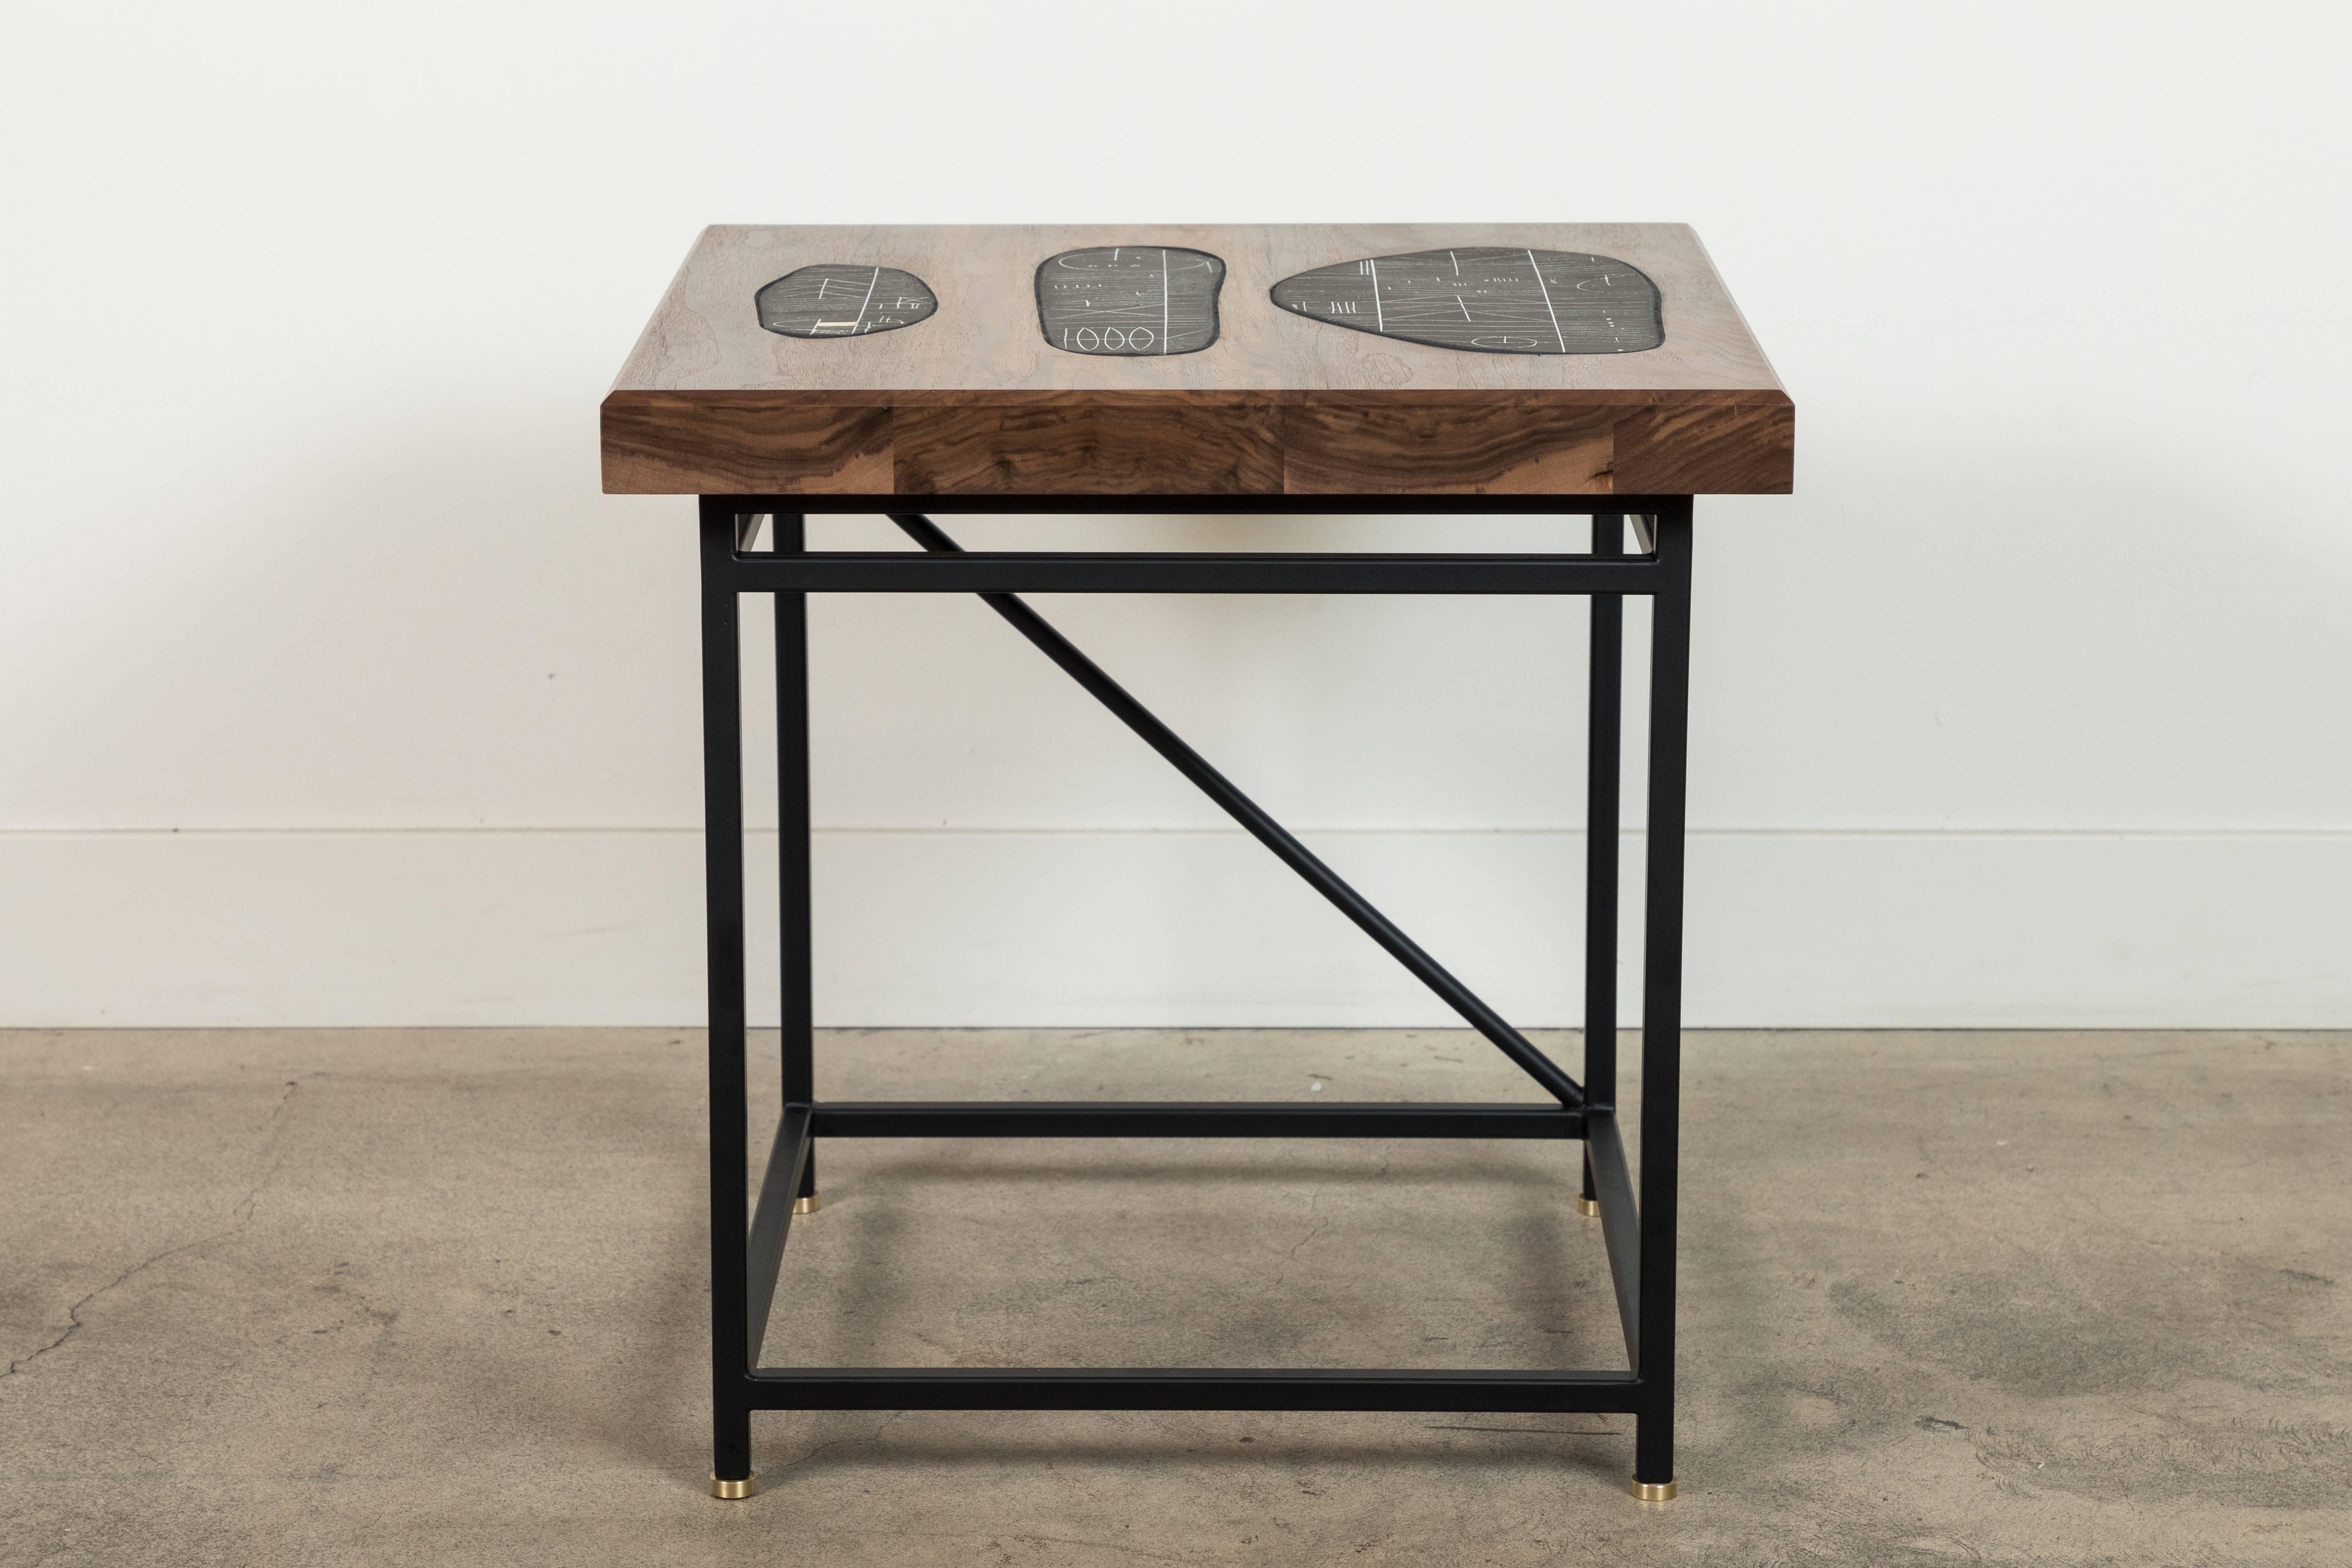 Solid Walnut and Ceramic Side Table by Heather Rosenman for Collabs in Clay 2